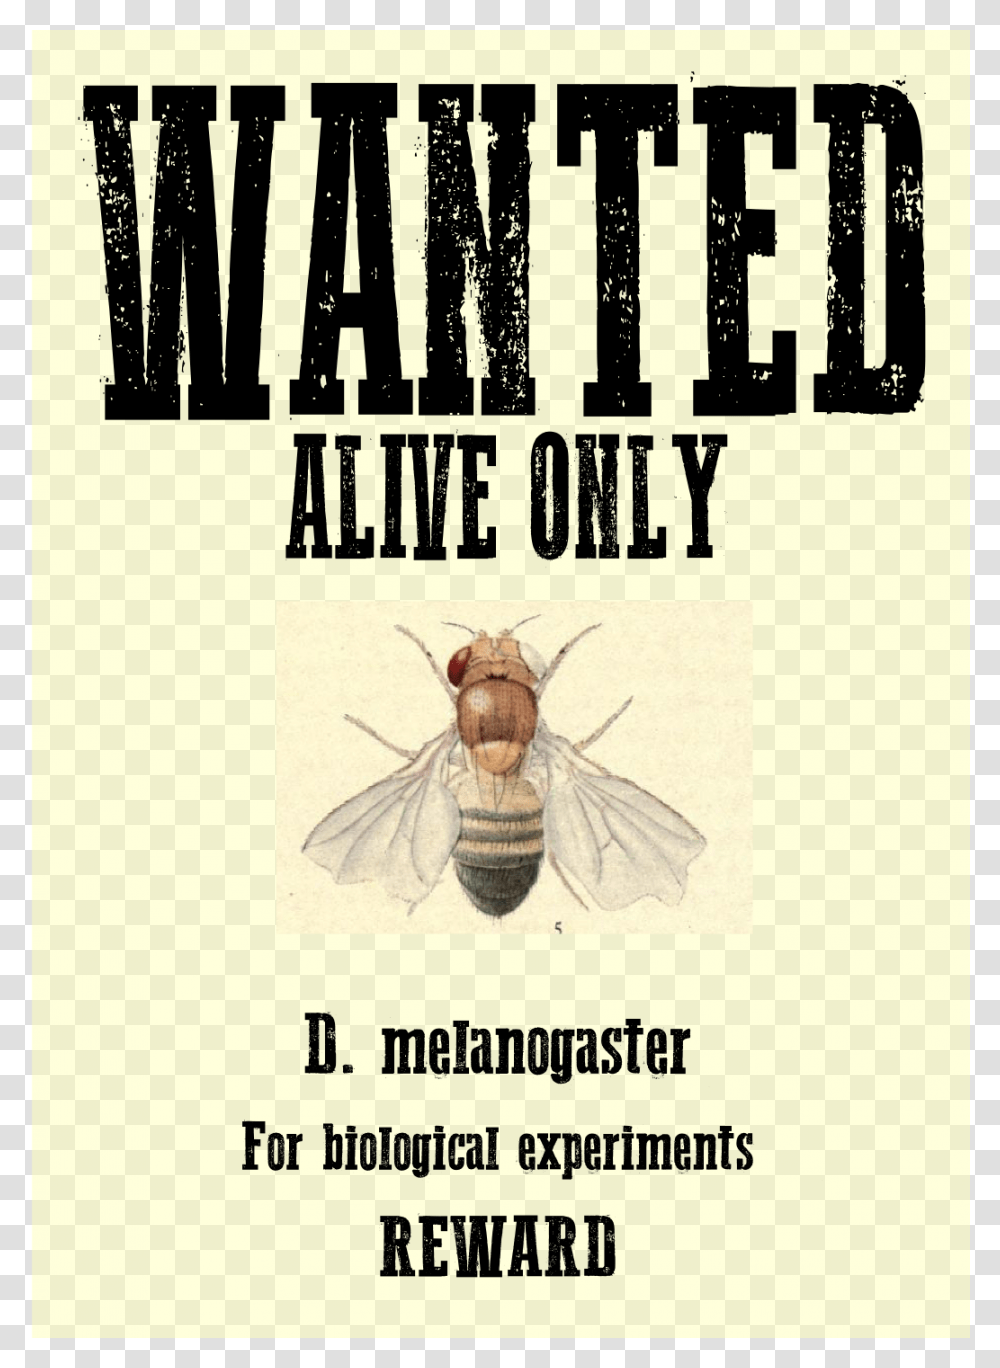 Research Drososhares News, Insect, Invertebrate, Animal, Poster Transparent Png